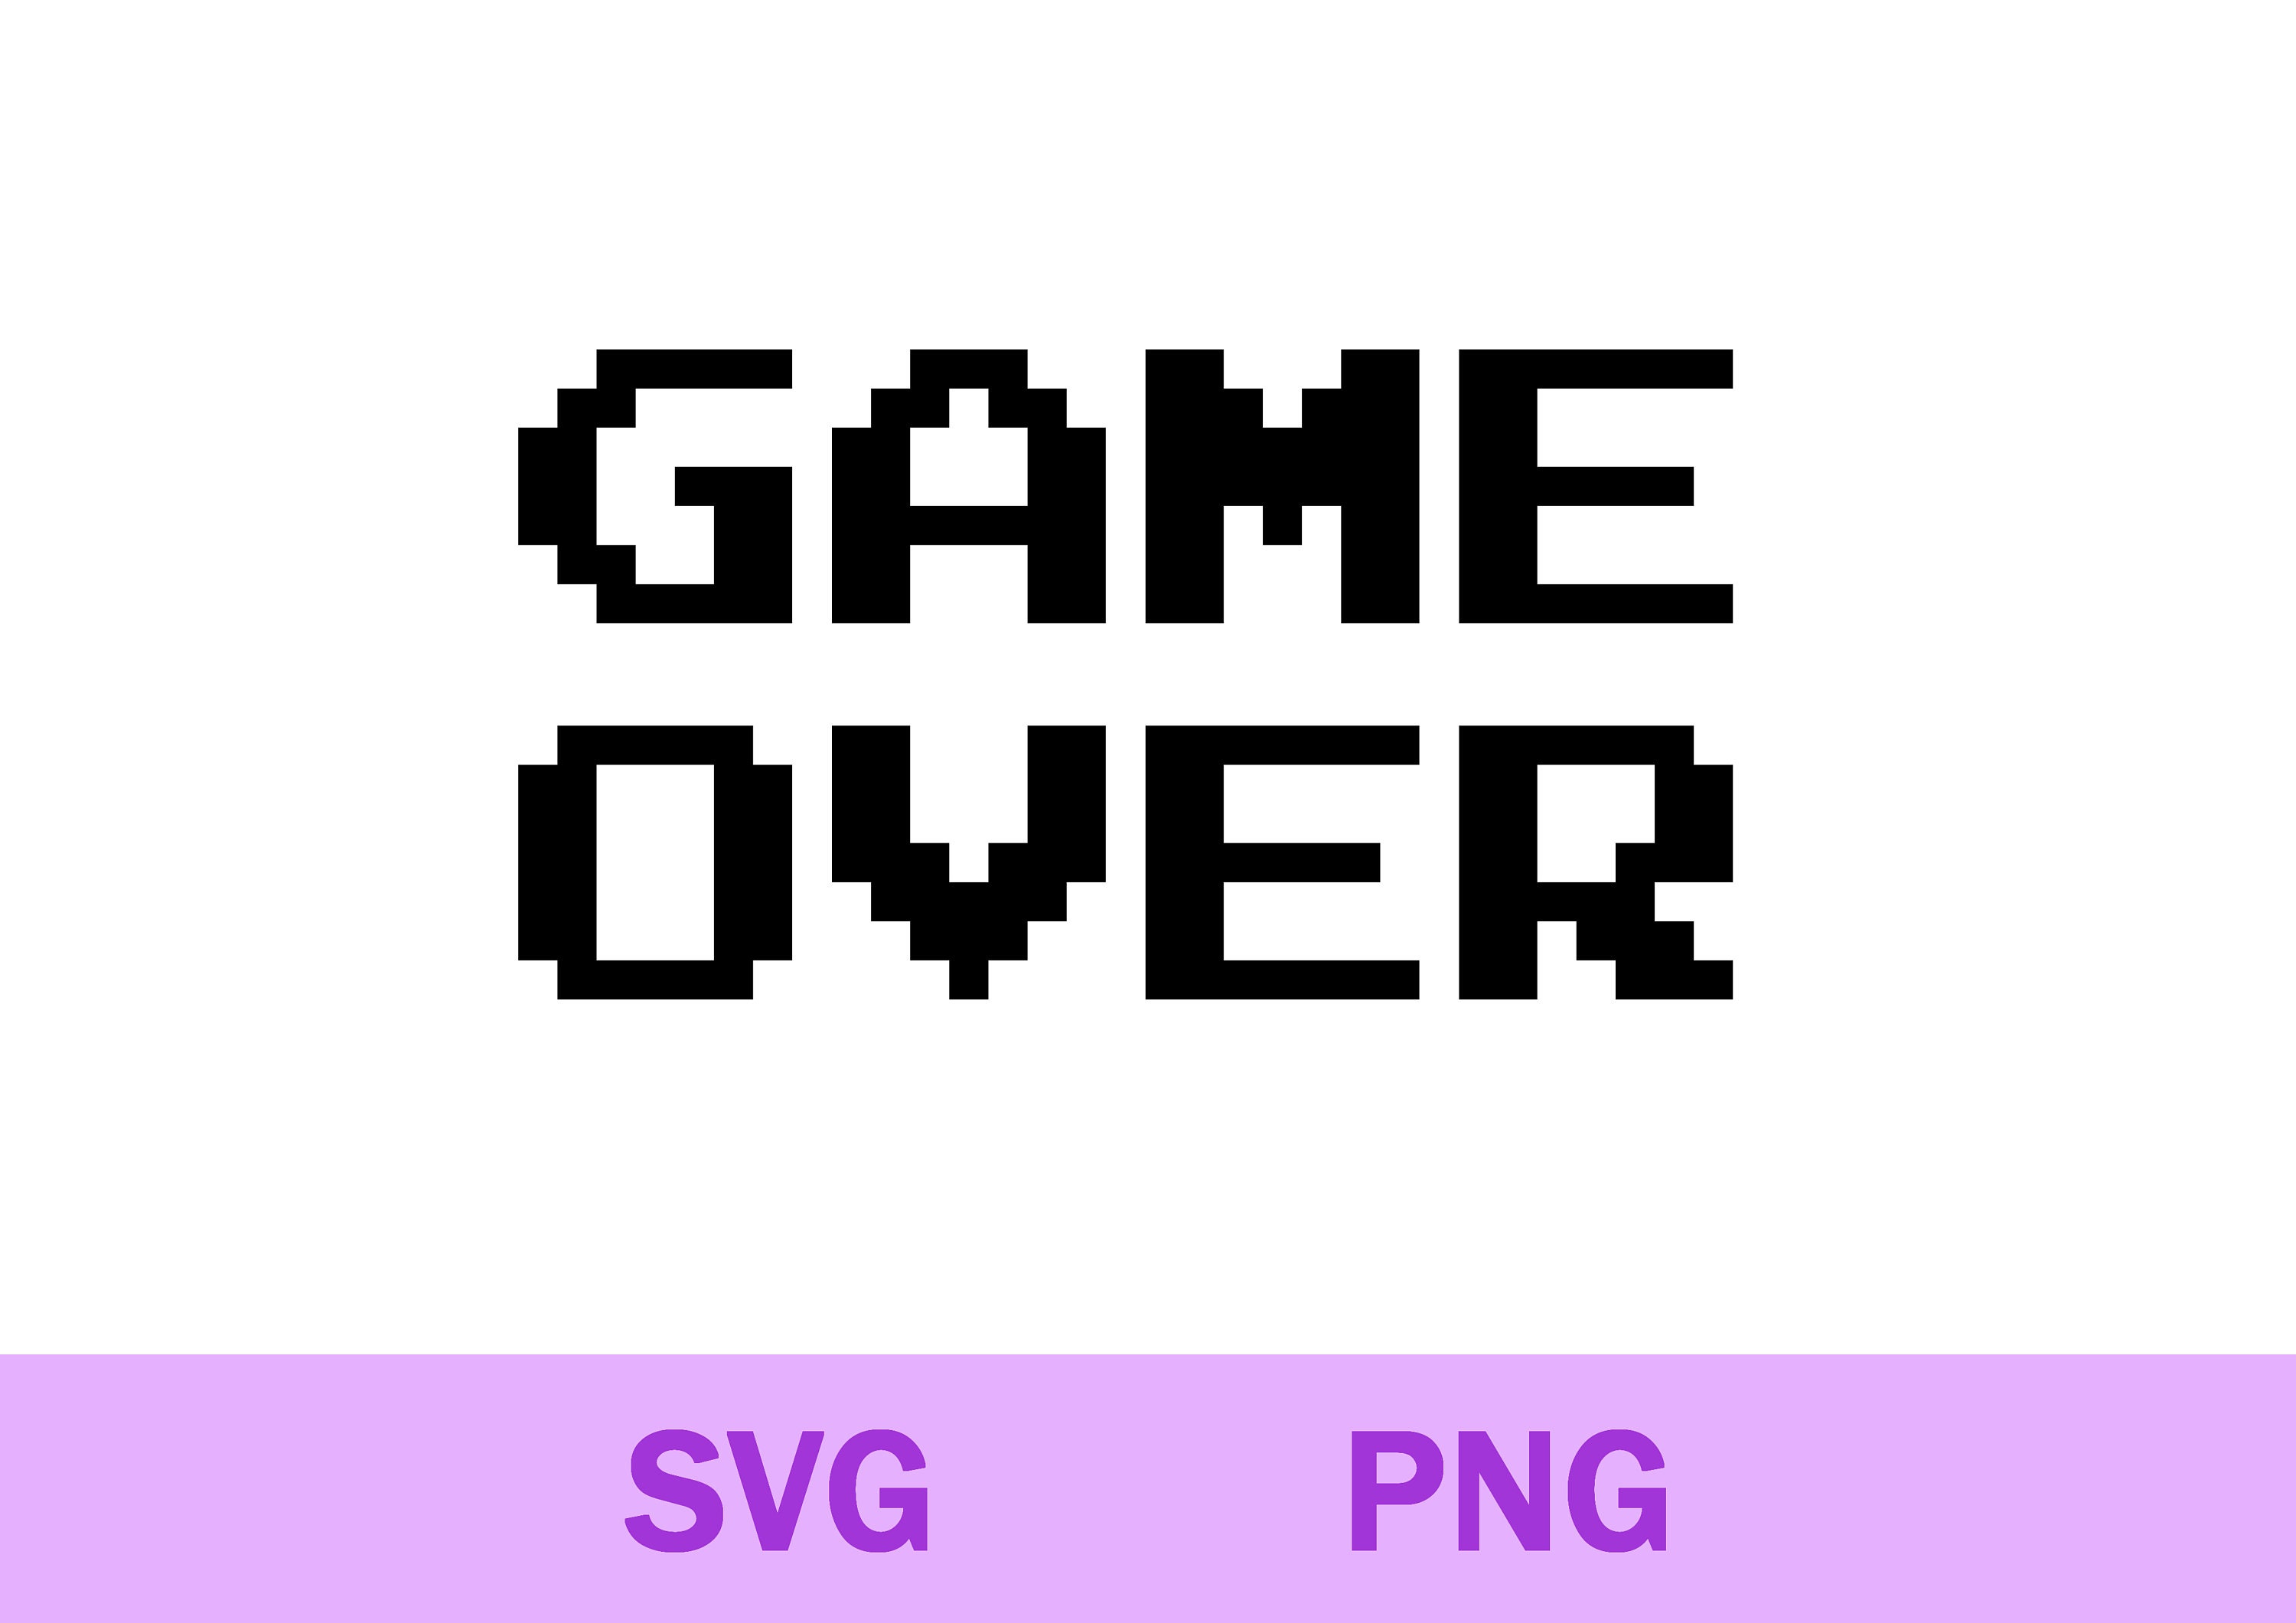 Game Over Pixel Sticker by created by South for iOS & Android